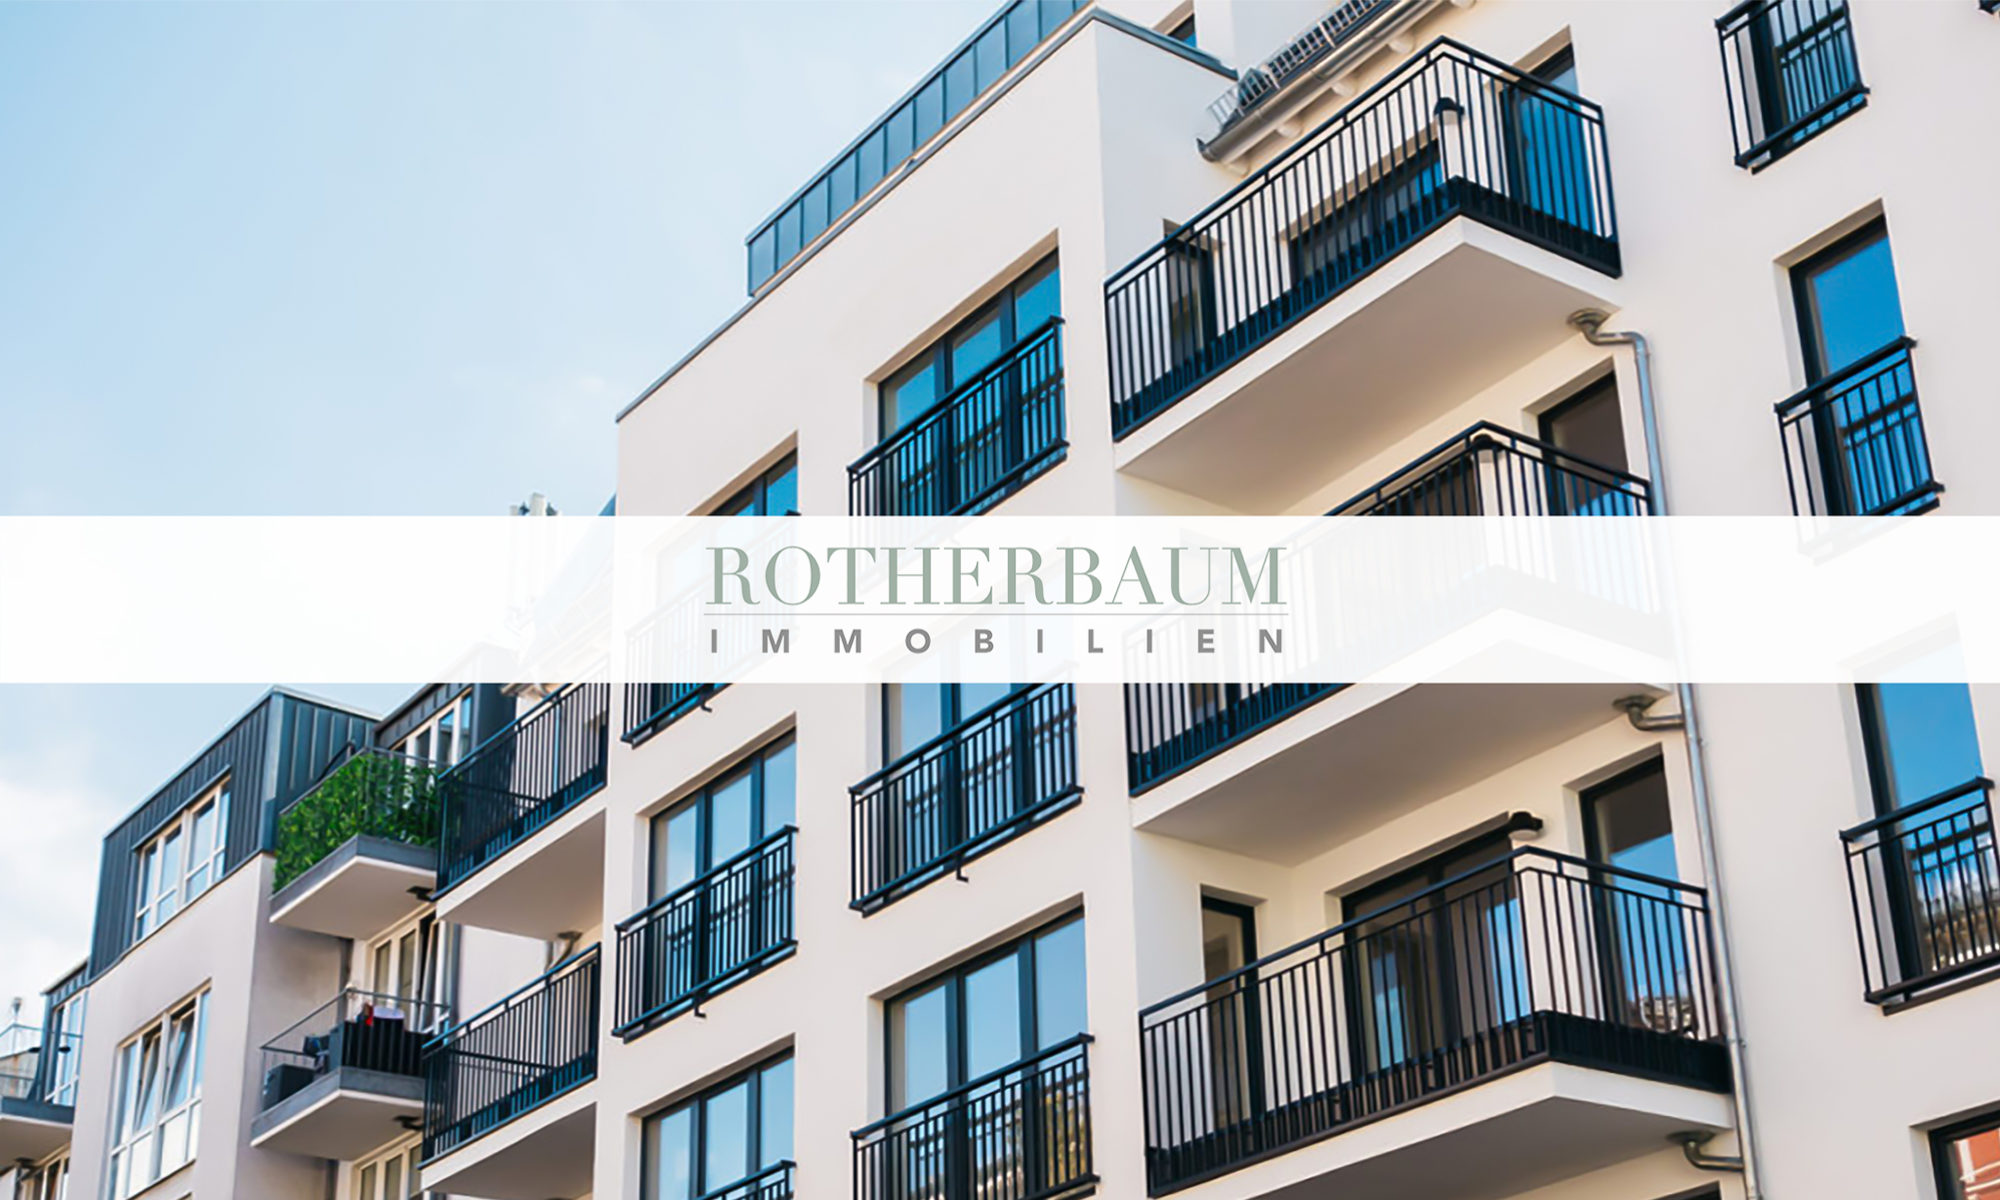 Rotherbaum Immobilien